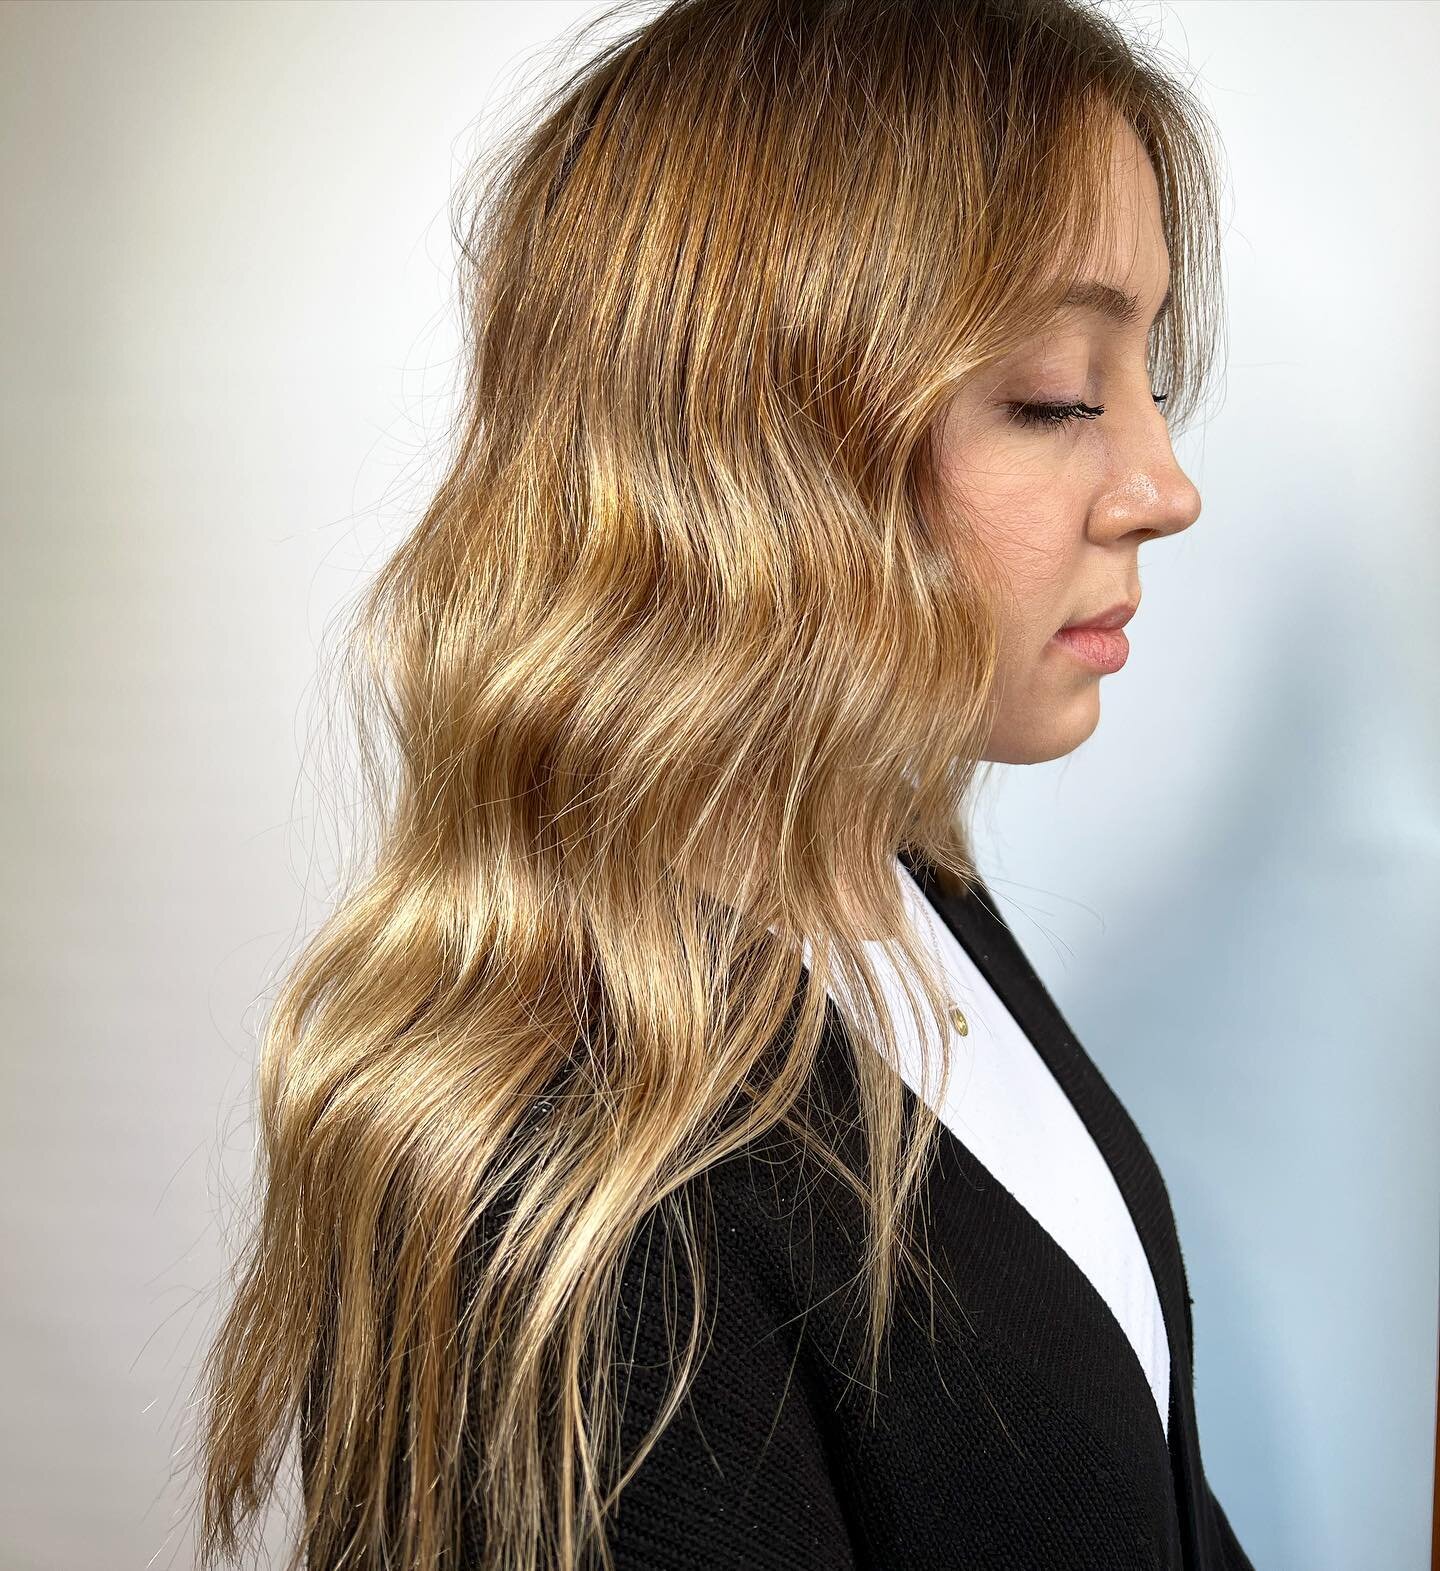 our lord and savior Harry Styles once said &ldquo;you&rsquo;re so golden&rdquo; and he was right 🤩 

#balayage #lexingtonky #sharethelex #salonchacha